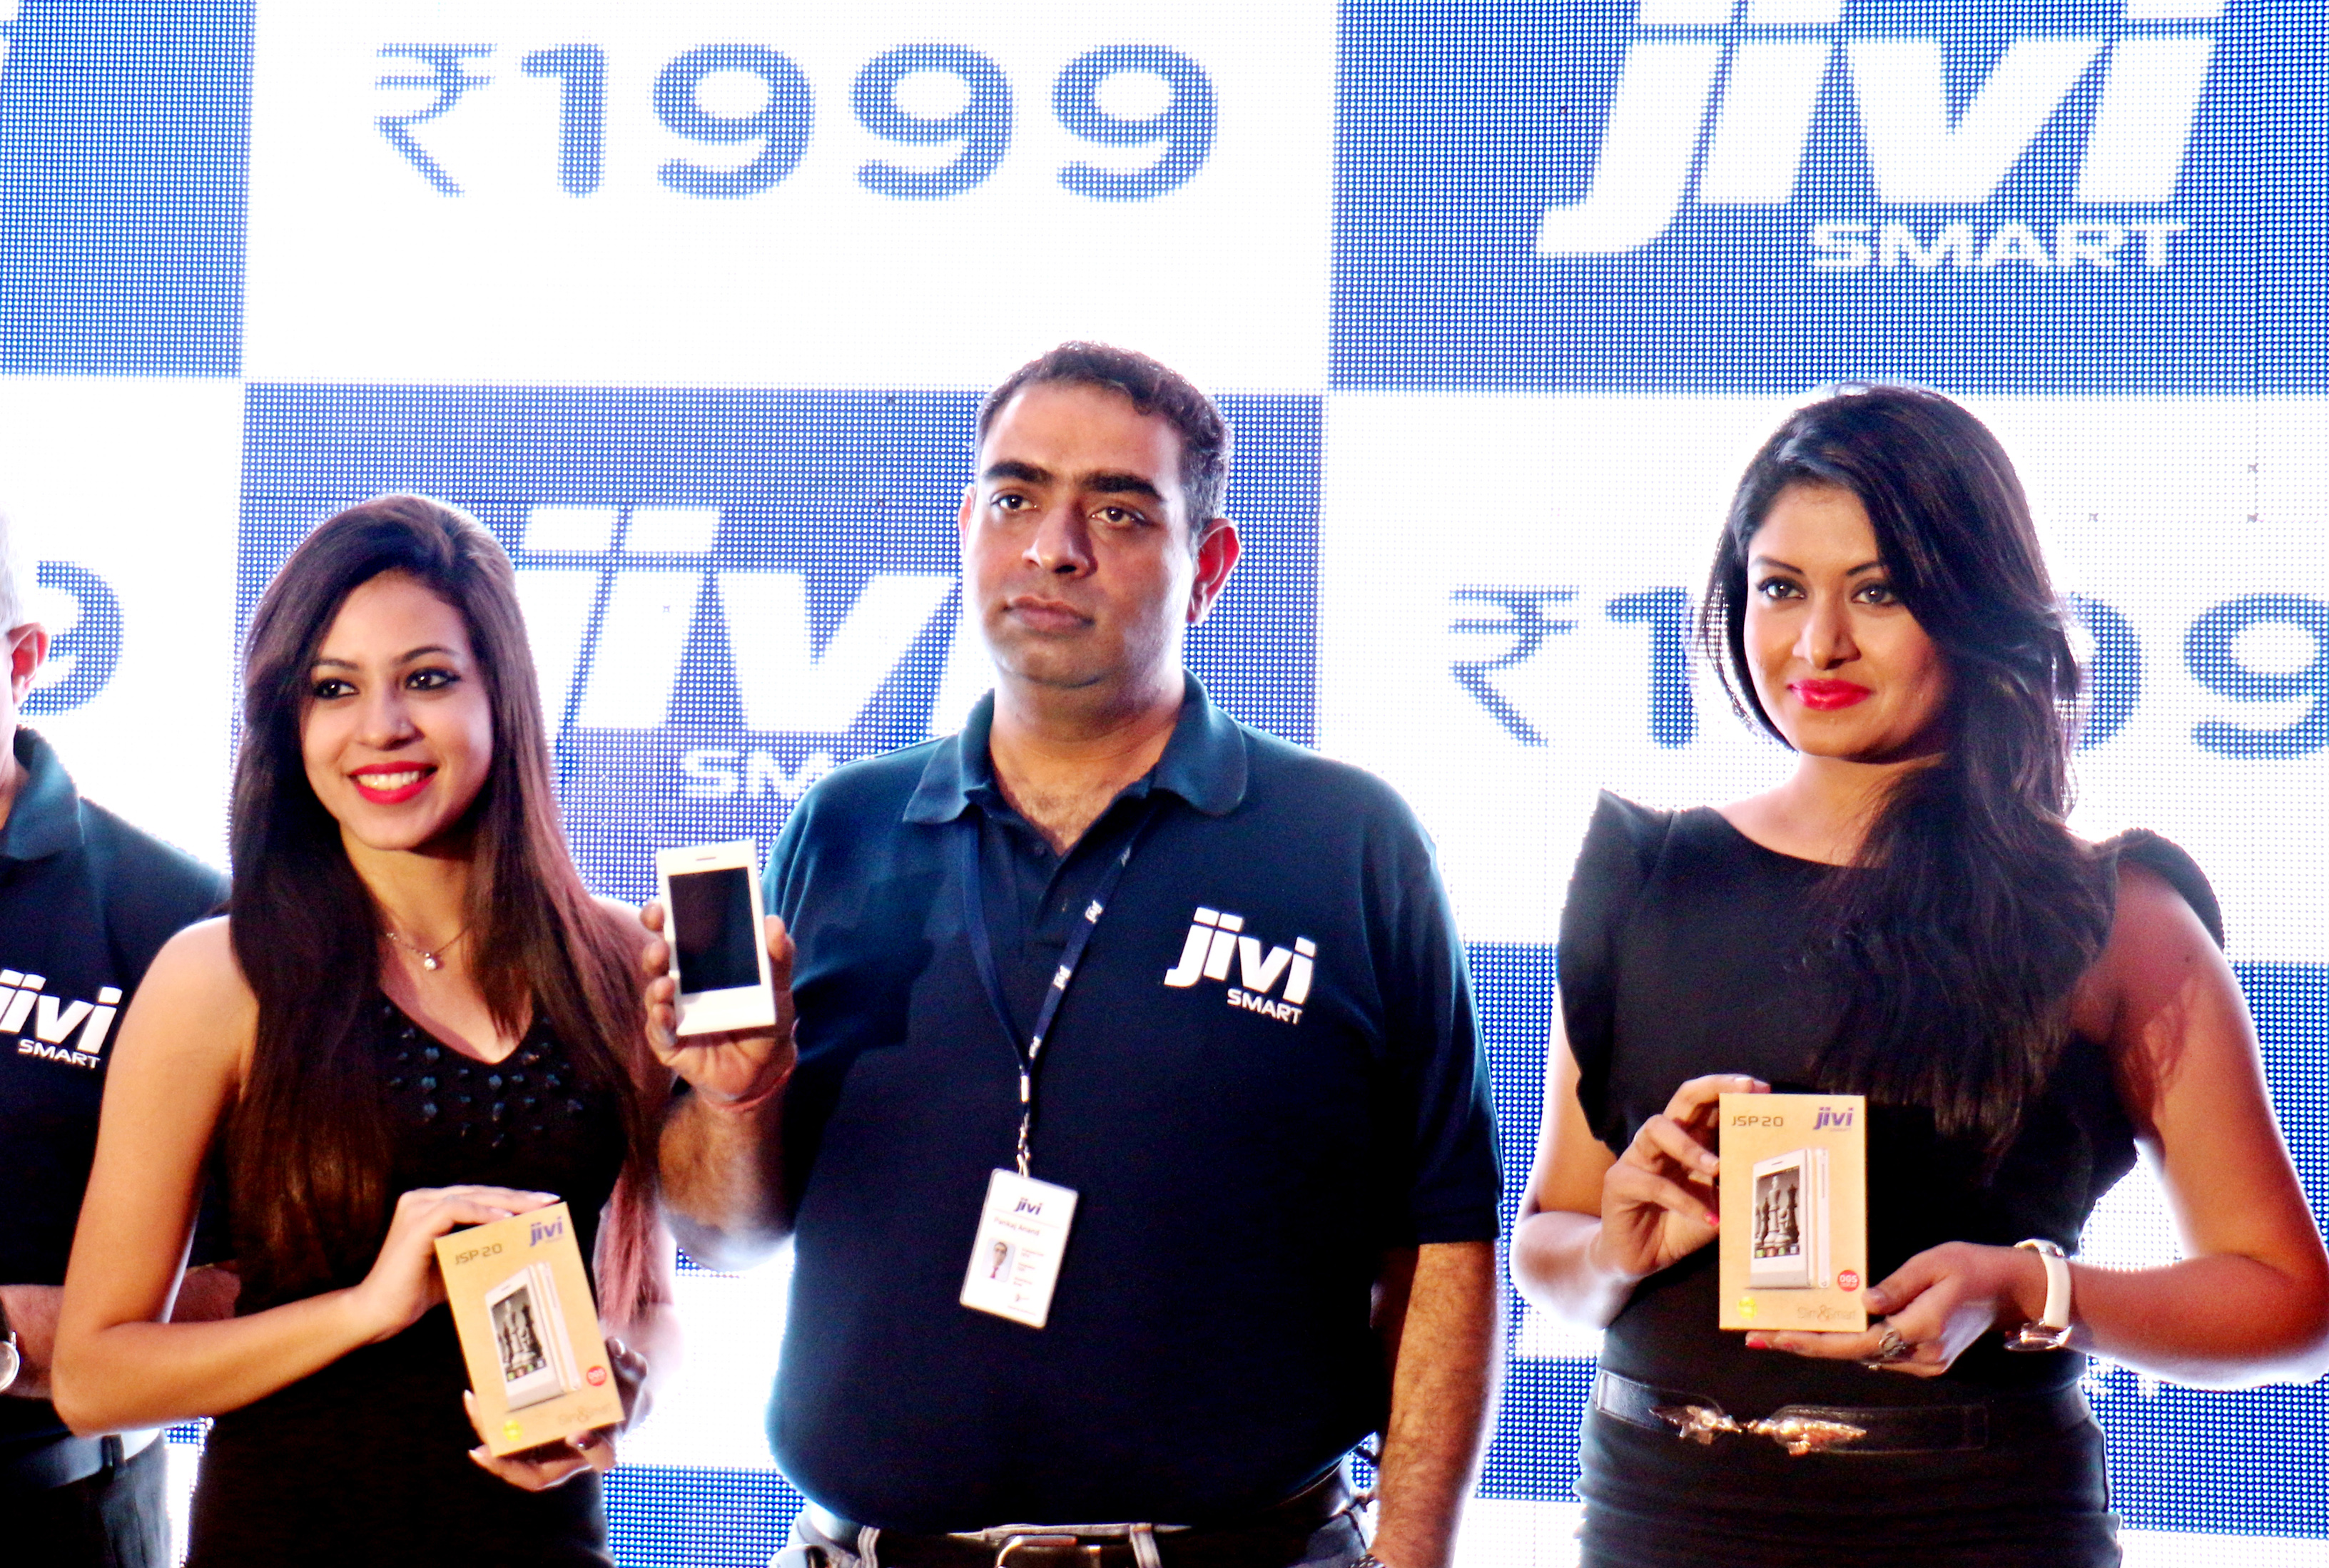 Pankaj Anand CEO Jivi Mobile and with Models Launch